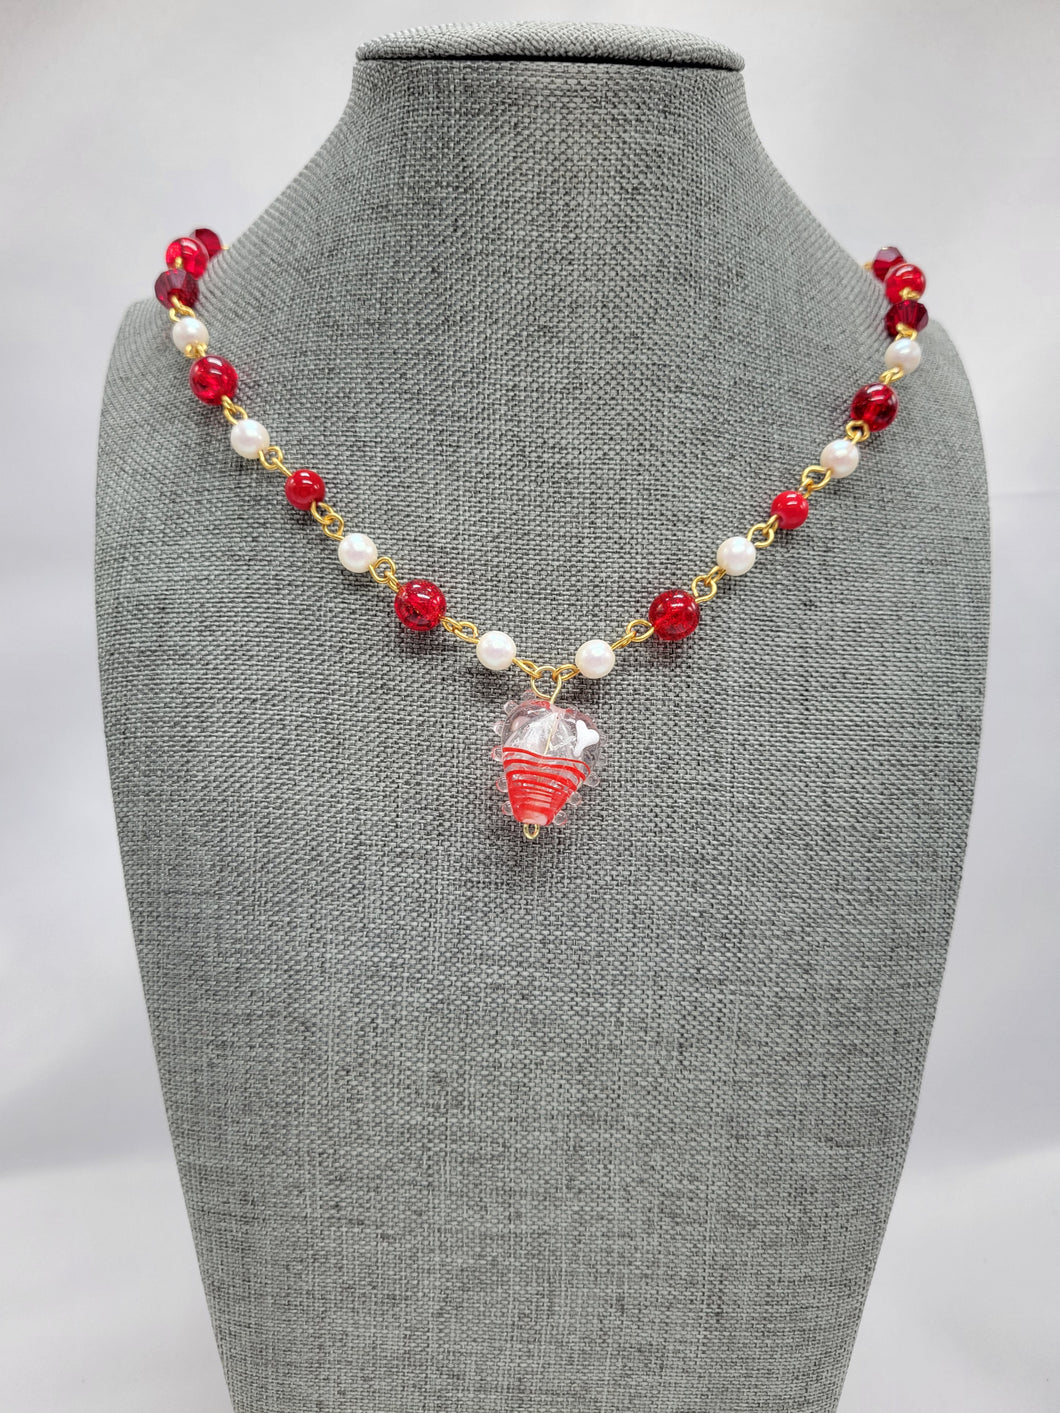 Valentines Heart Necklace